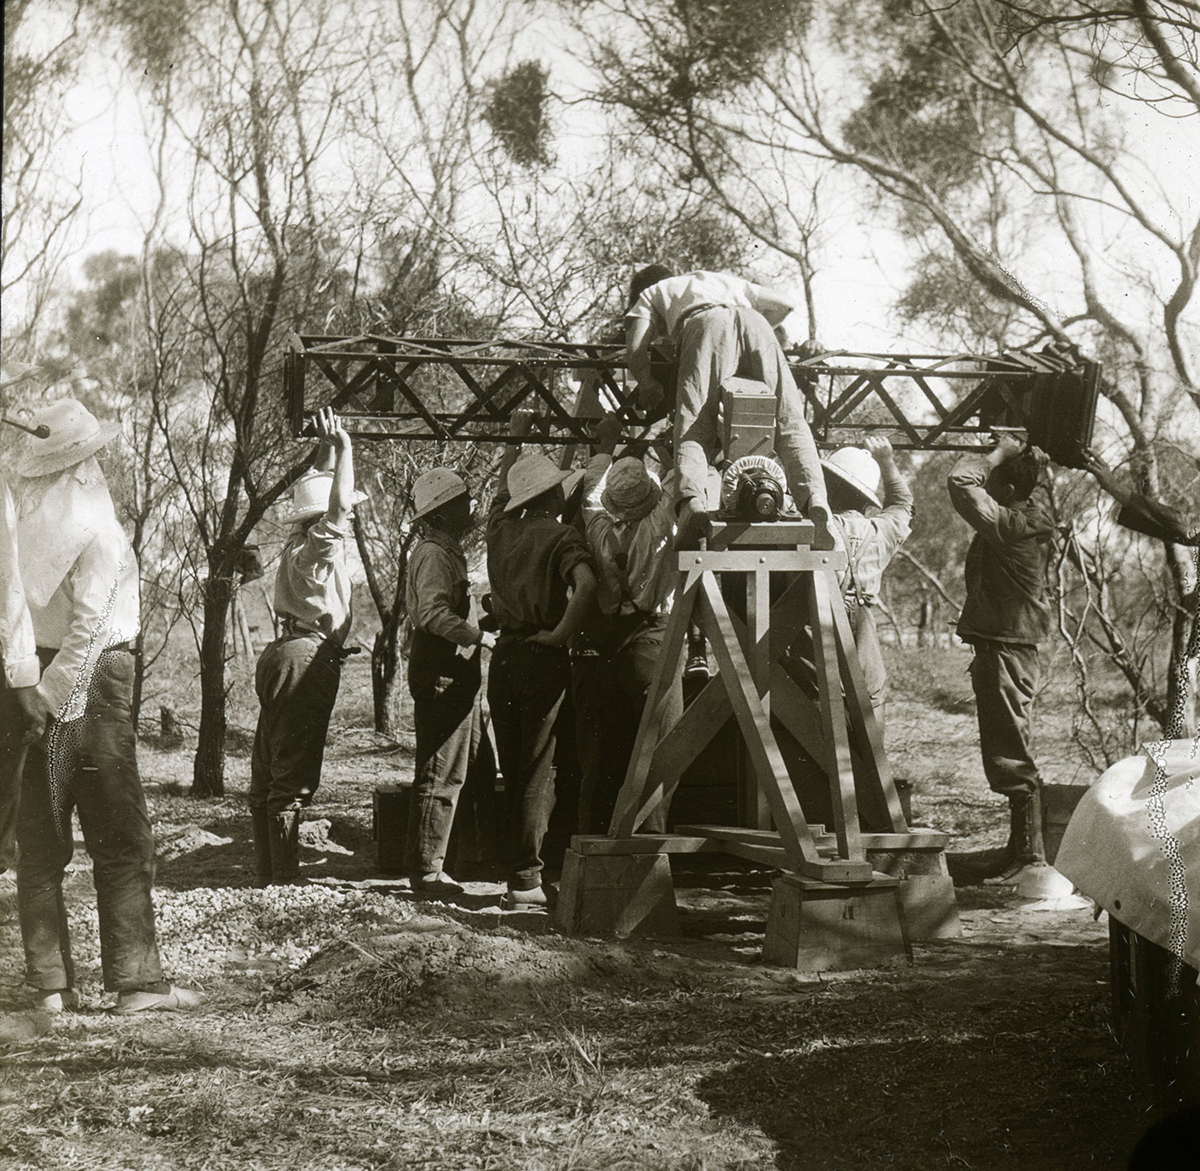 A sepia coloured photo of a group of scientists in white hats, holding over their heads a long metal tube-like structure with the photographic plate holder on one end. One scientist is helping with positioning the metal tube, while standing on top of a tall wooden tripod-like structure, where part of the Einstein camera is placed.